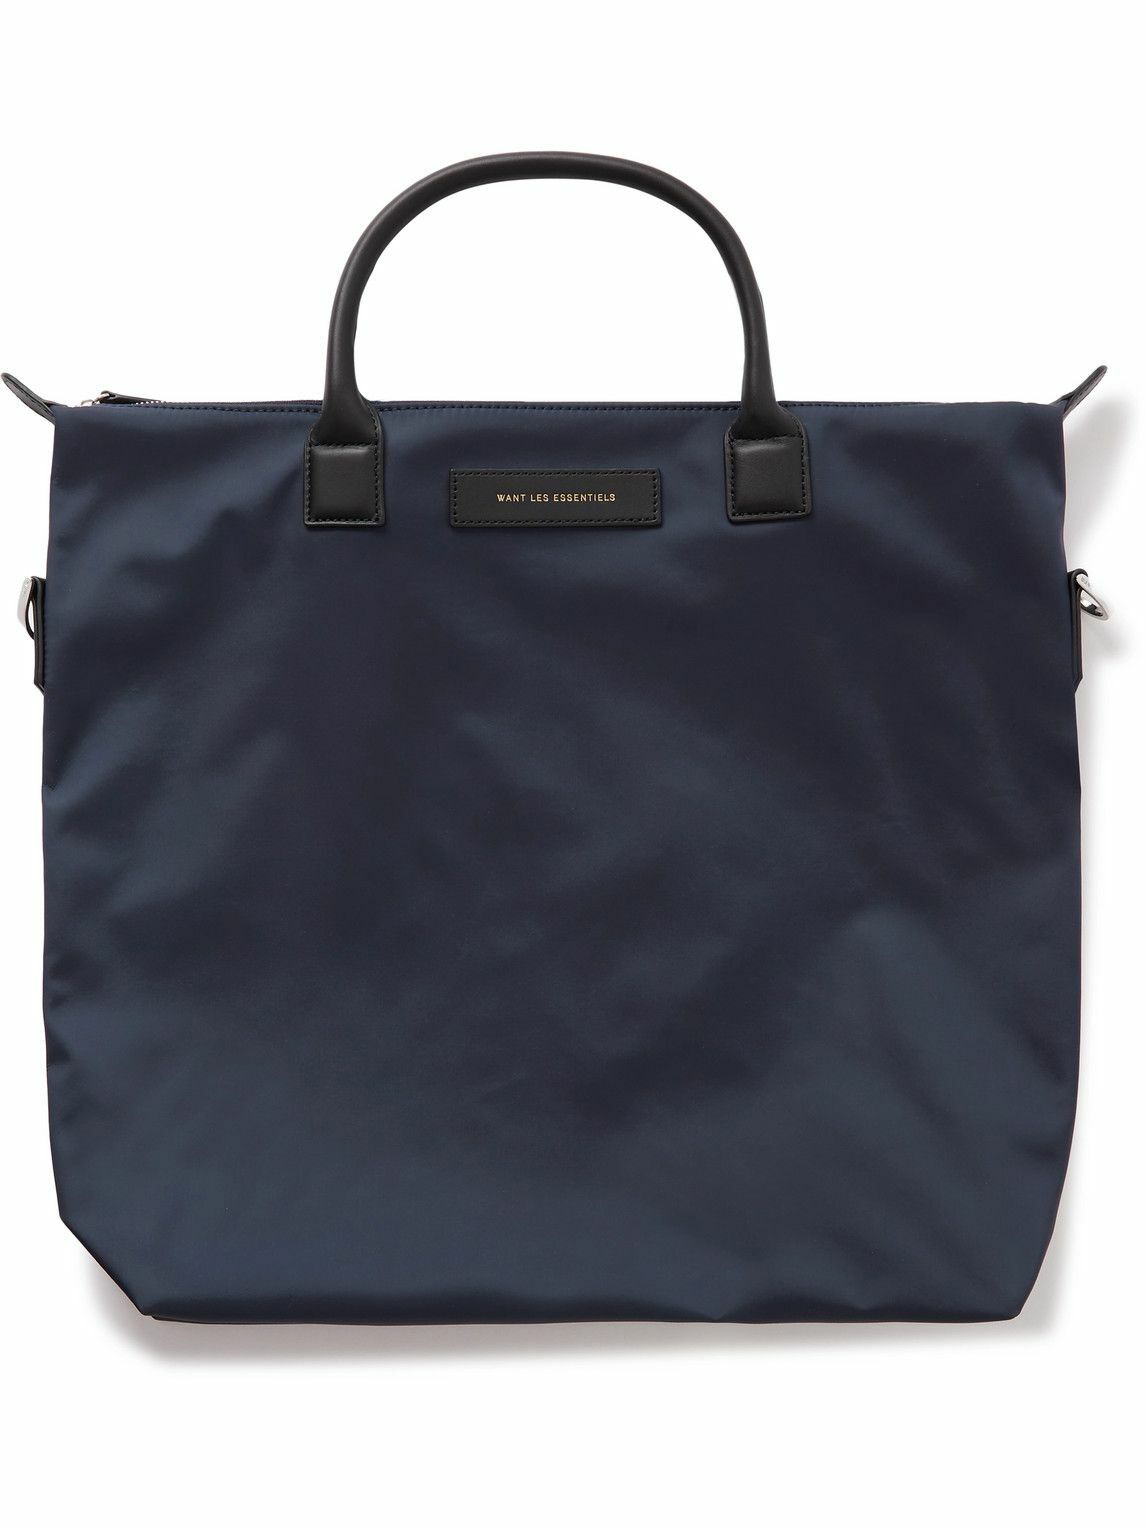 Photo: WANT LES ESSENTIELS - O'Hare 2.0 Leather-Trimmed Nylon Tote Bag